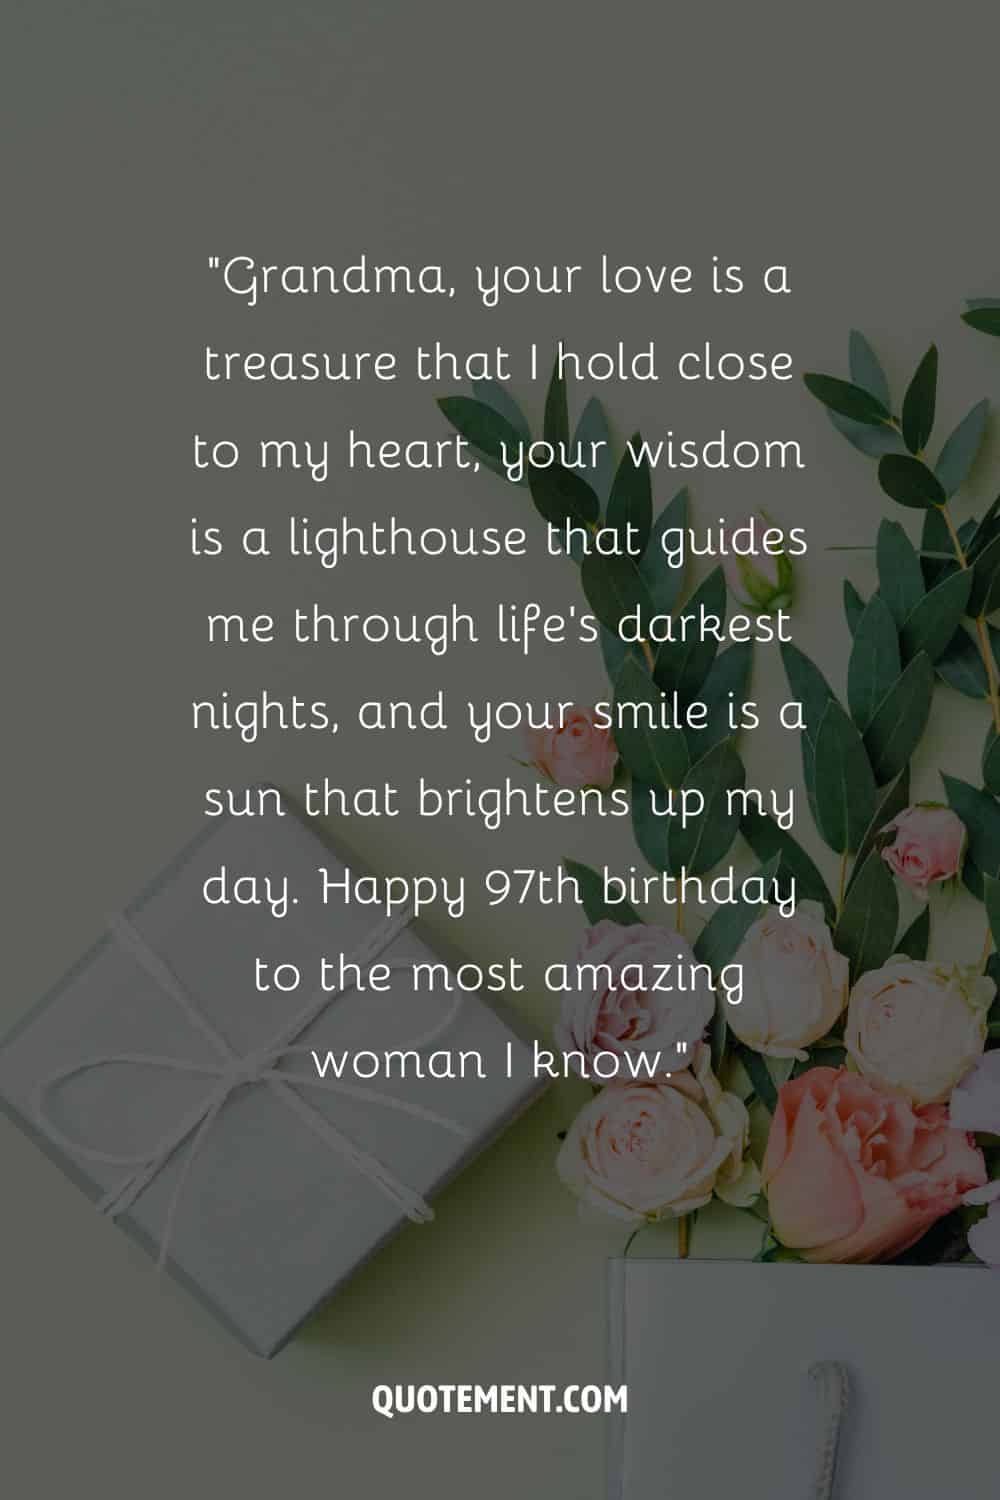 Beautiful message for a grandma who turns 97 and a present and roses in the background, too
